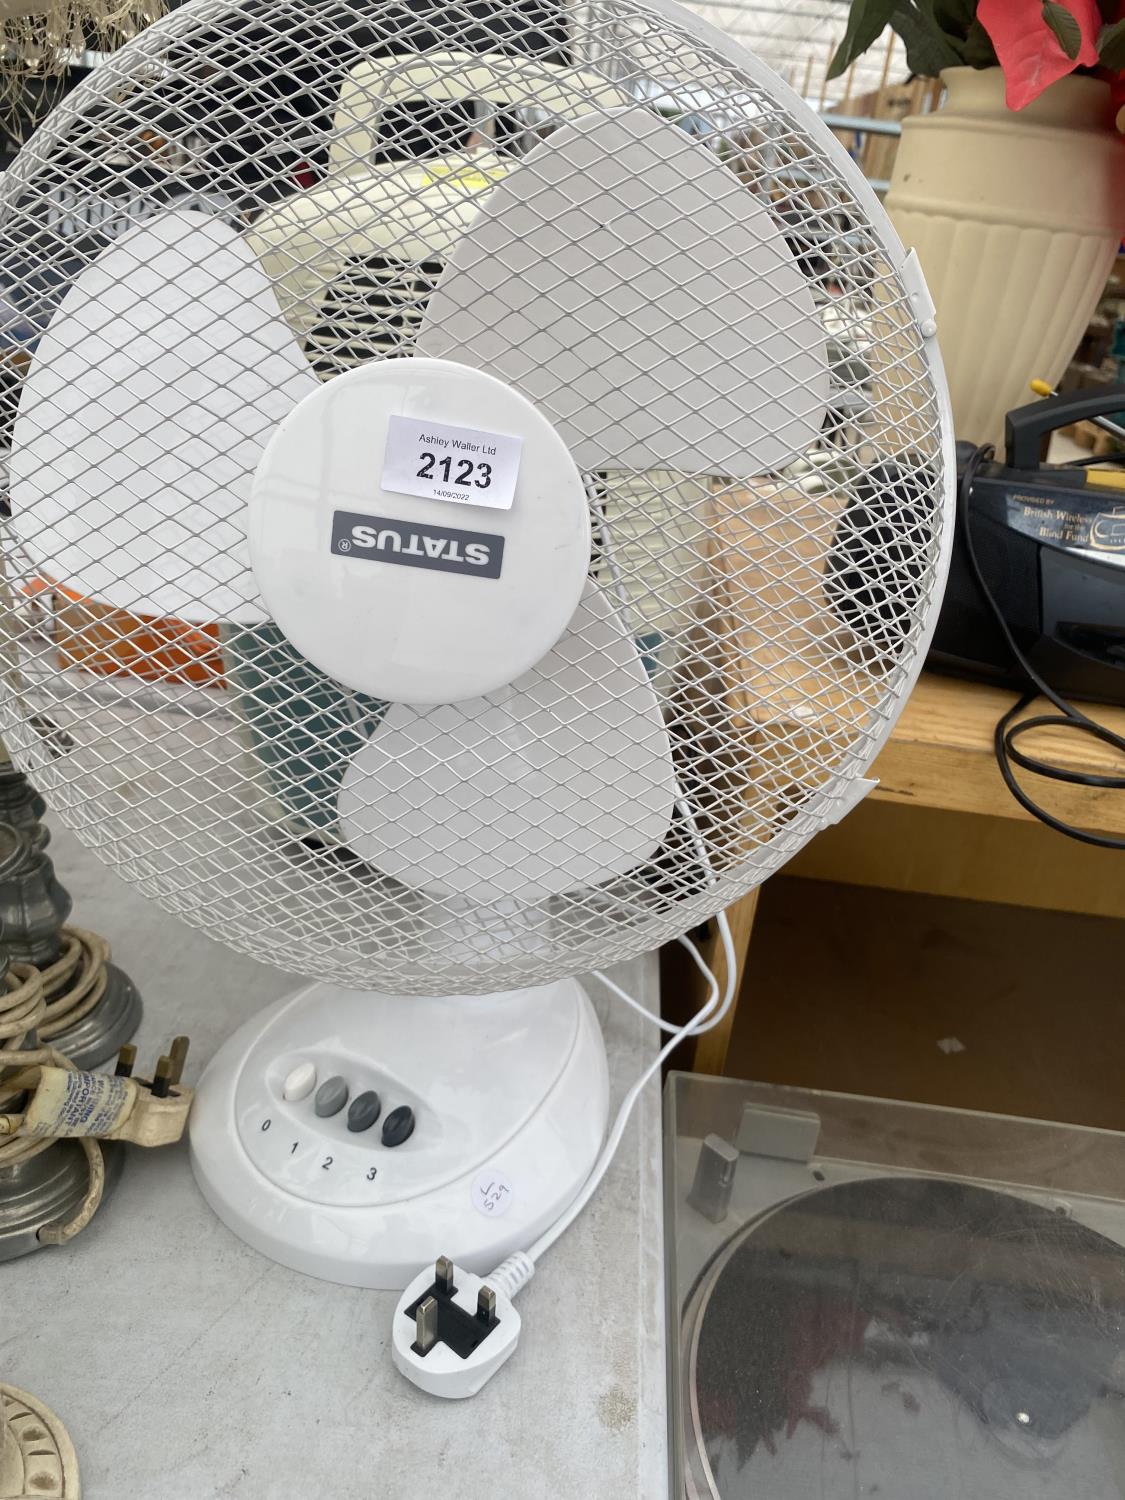 A STATUS FAN AND A DEHUMIDIFIER - Image 3 of 3